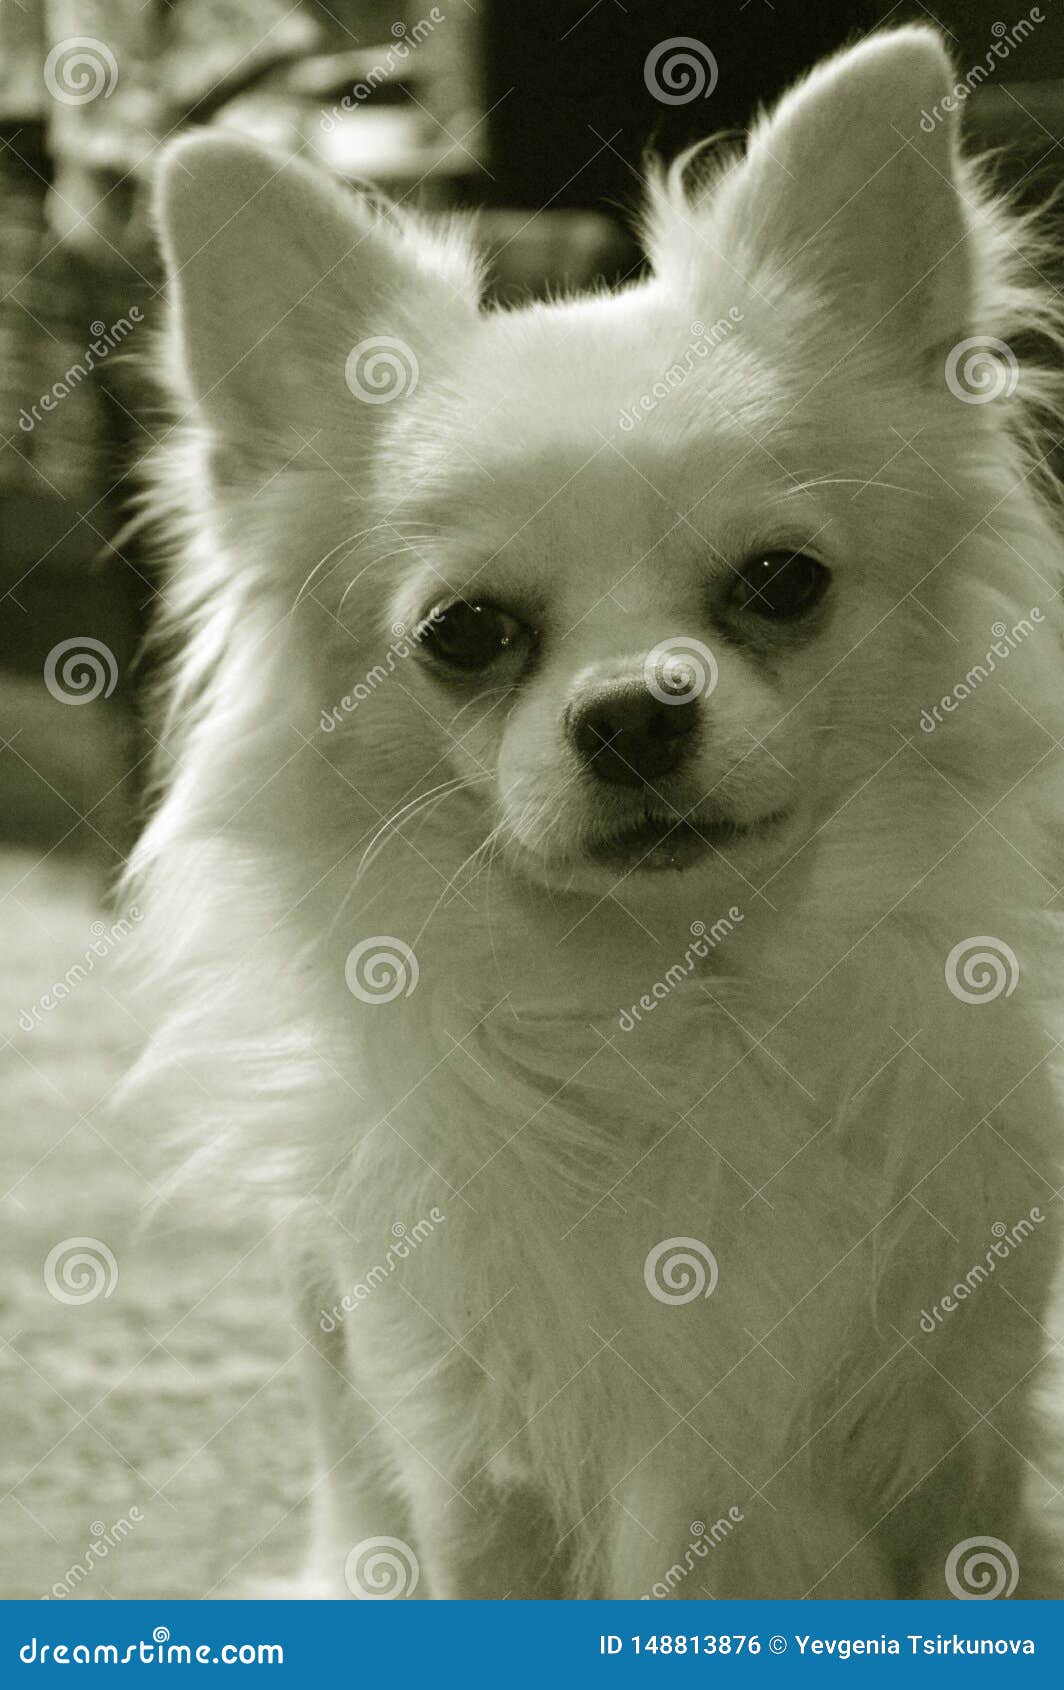 white long haired chihuahua